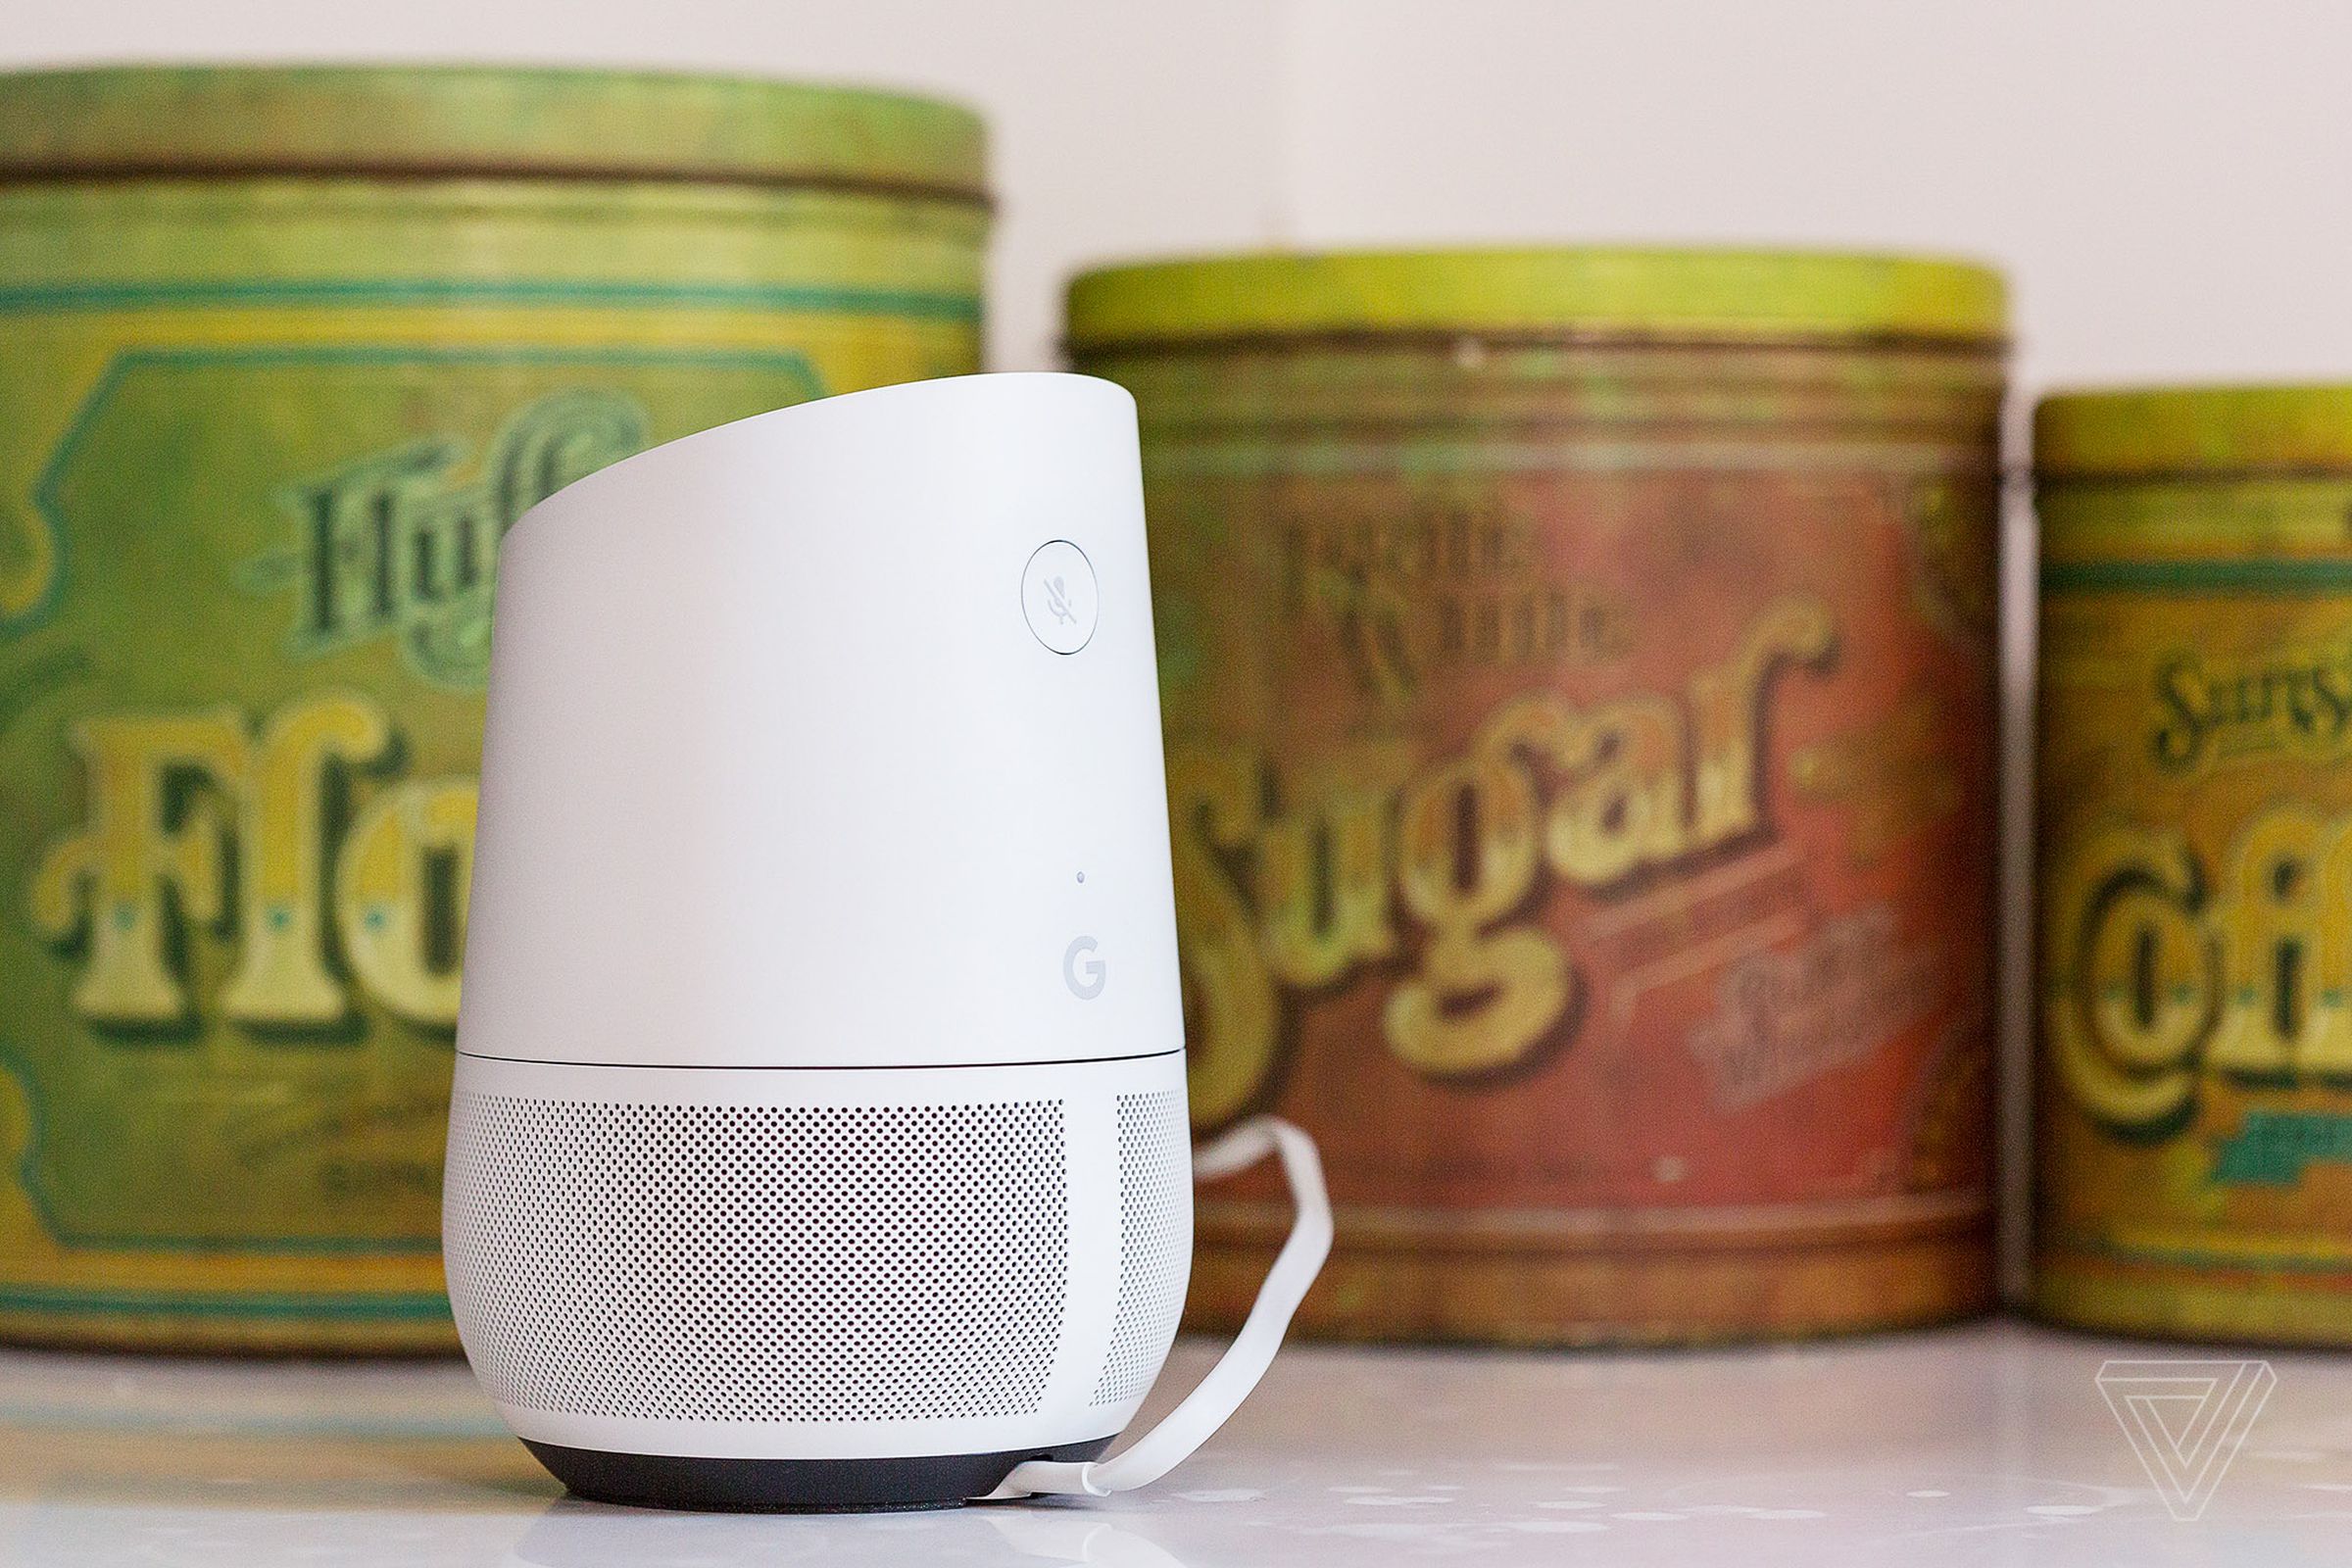 Google Home speaker in front of sugar cans